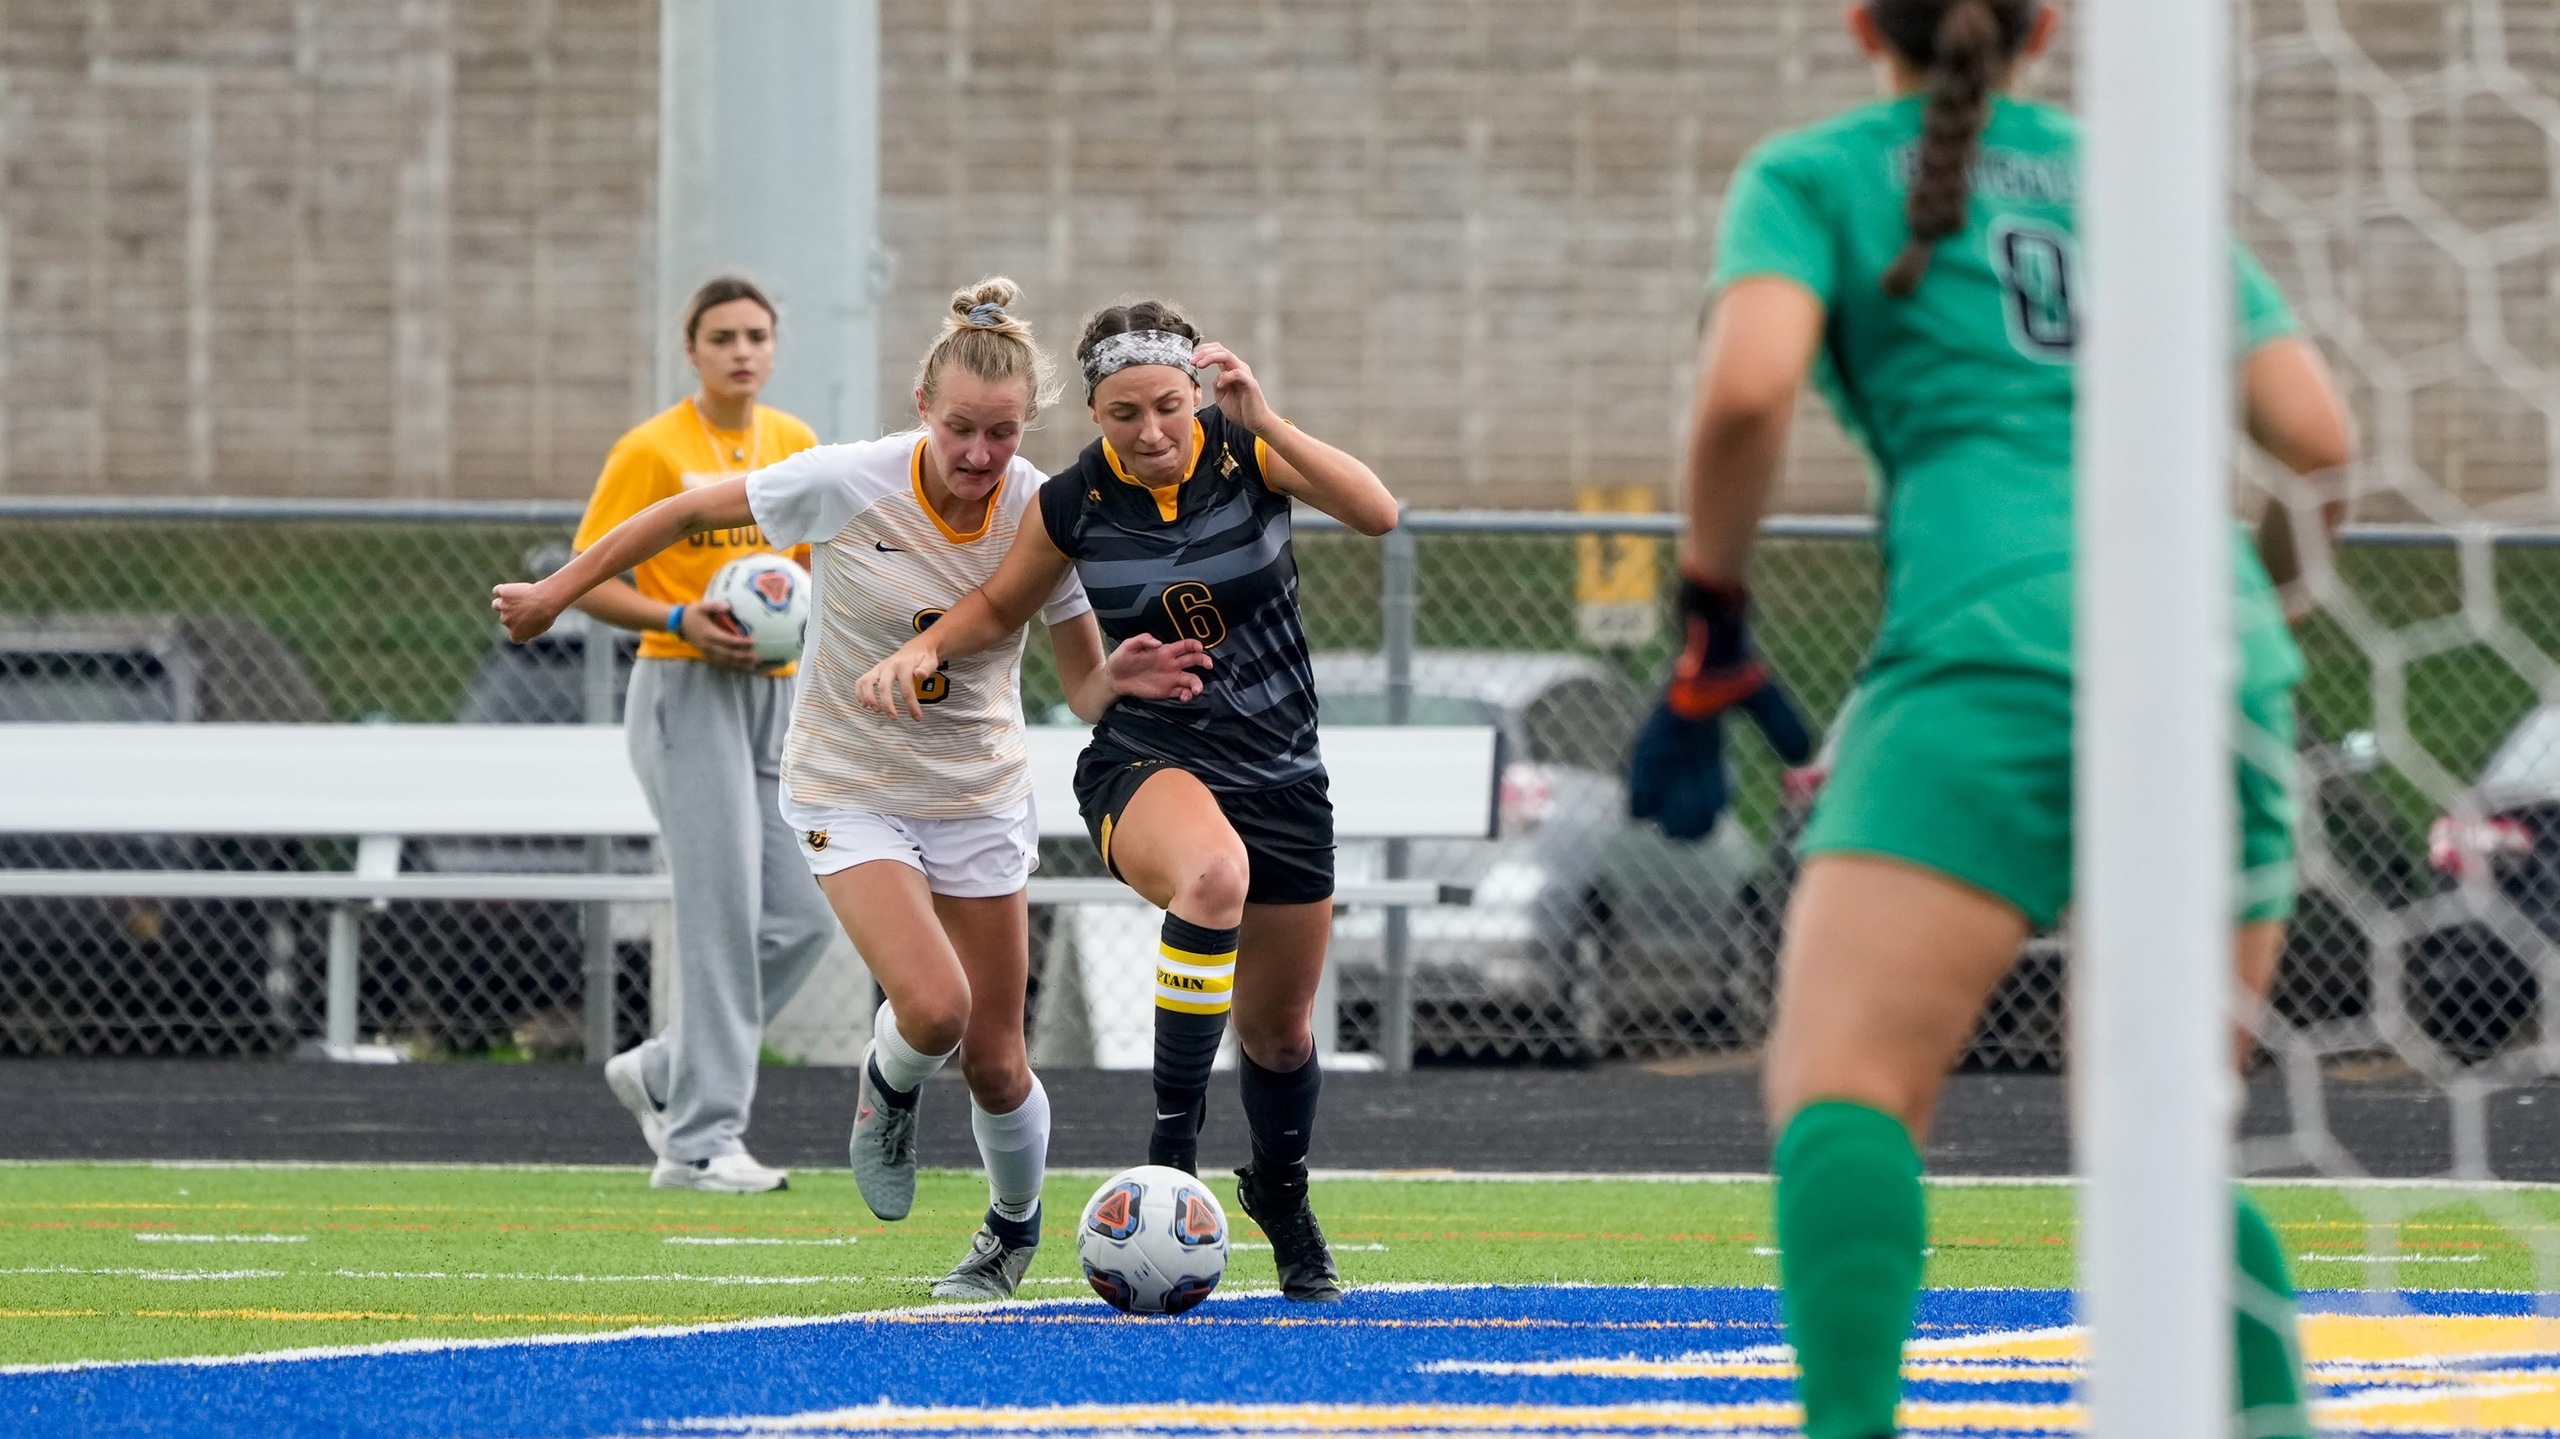 Mallory Knight's 50th career point was a match-winning goal against the Blugolds.